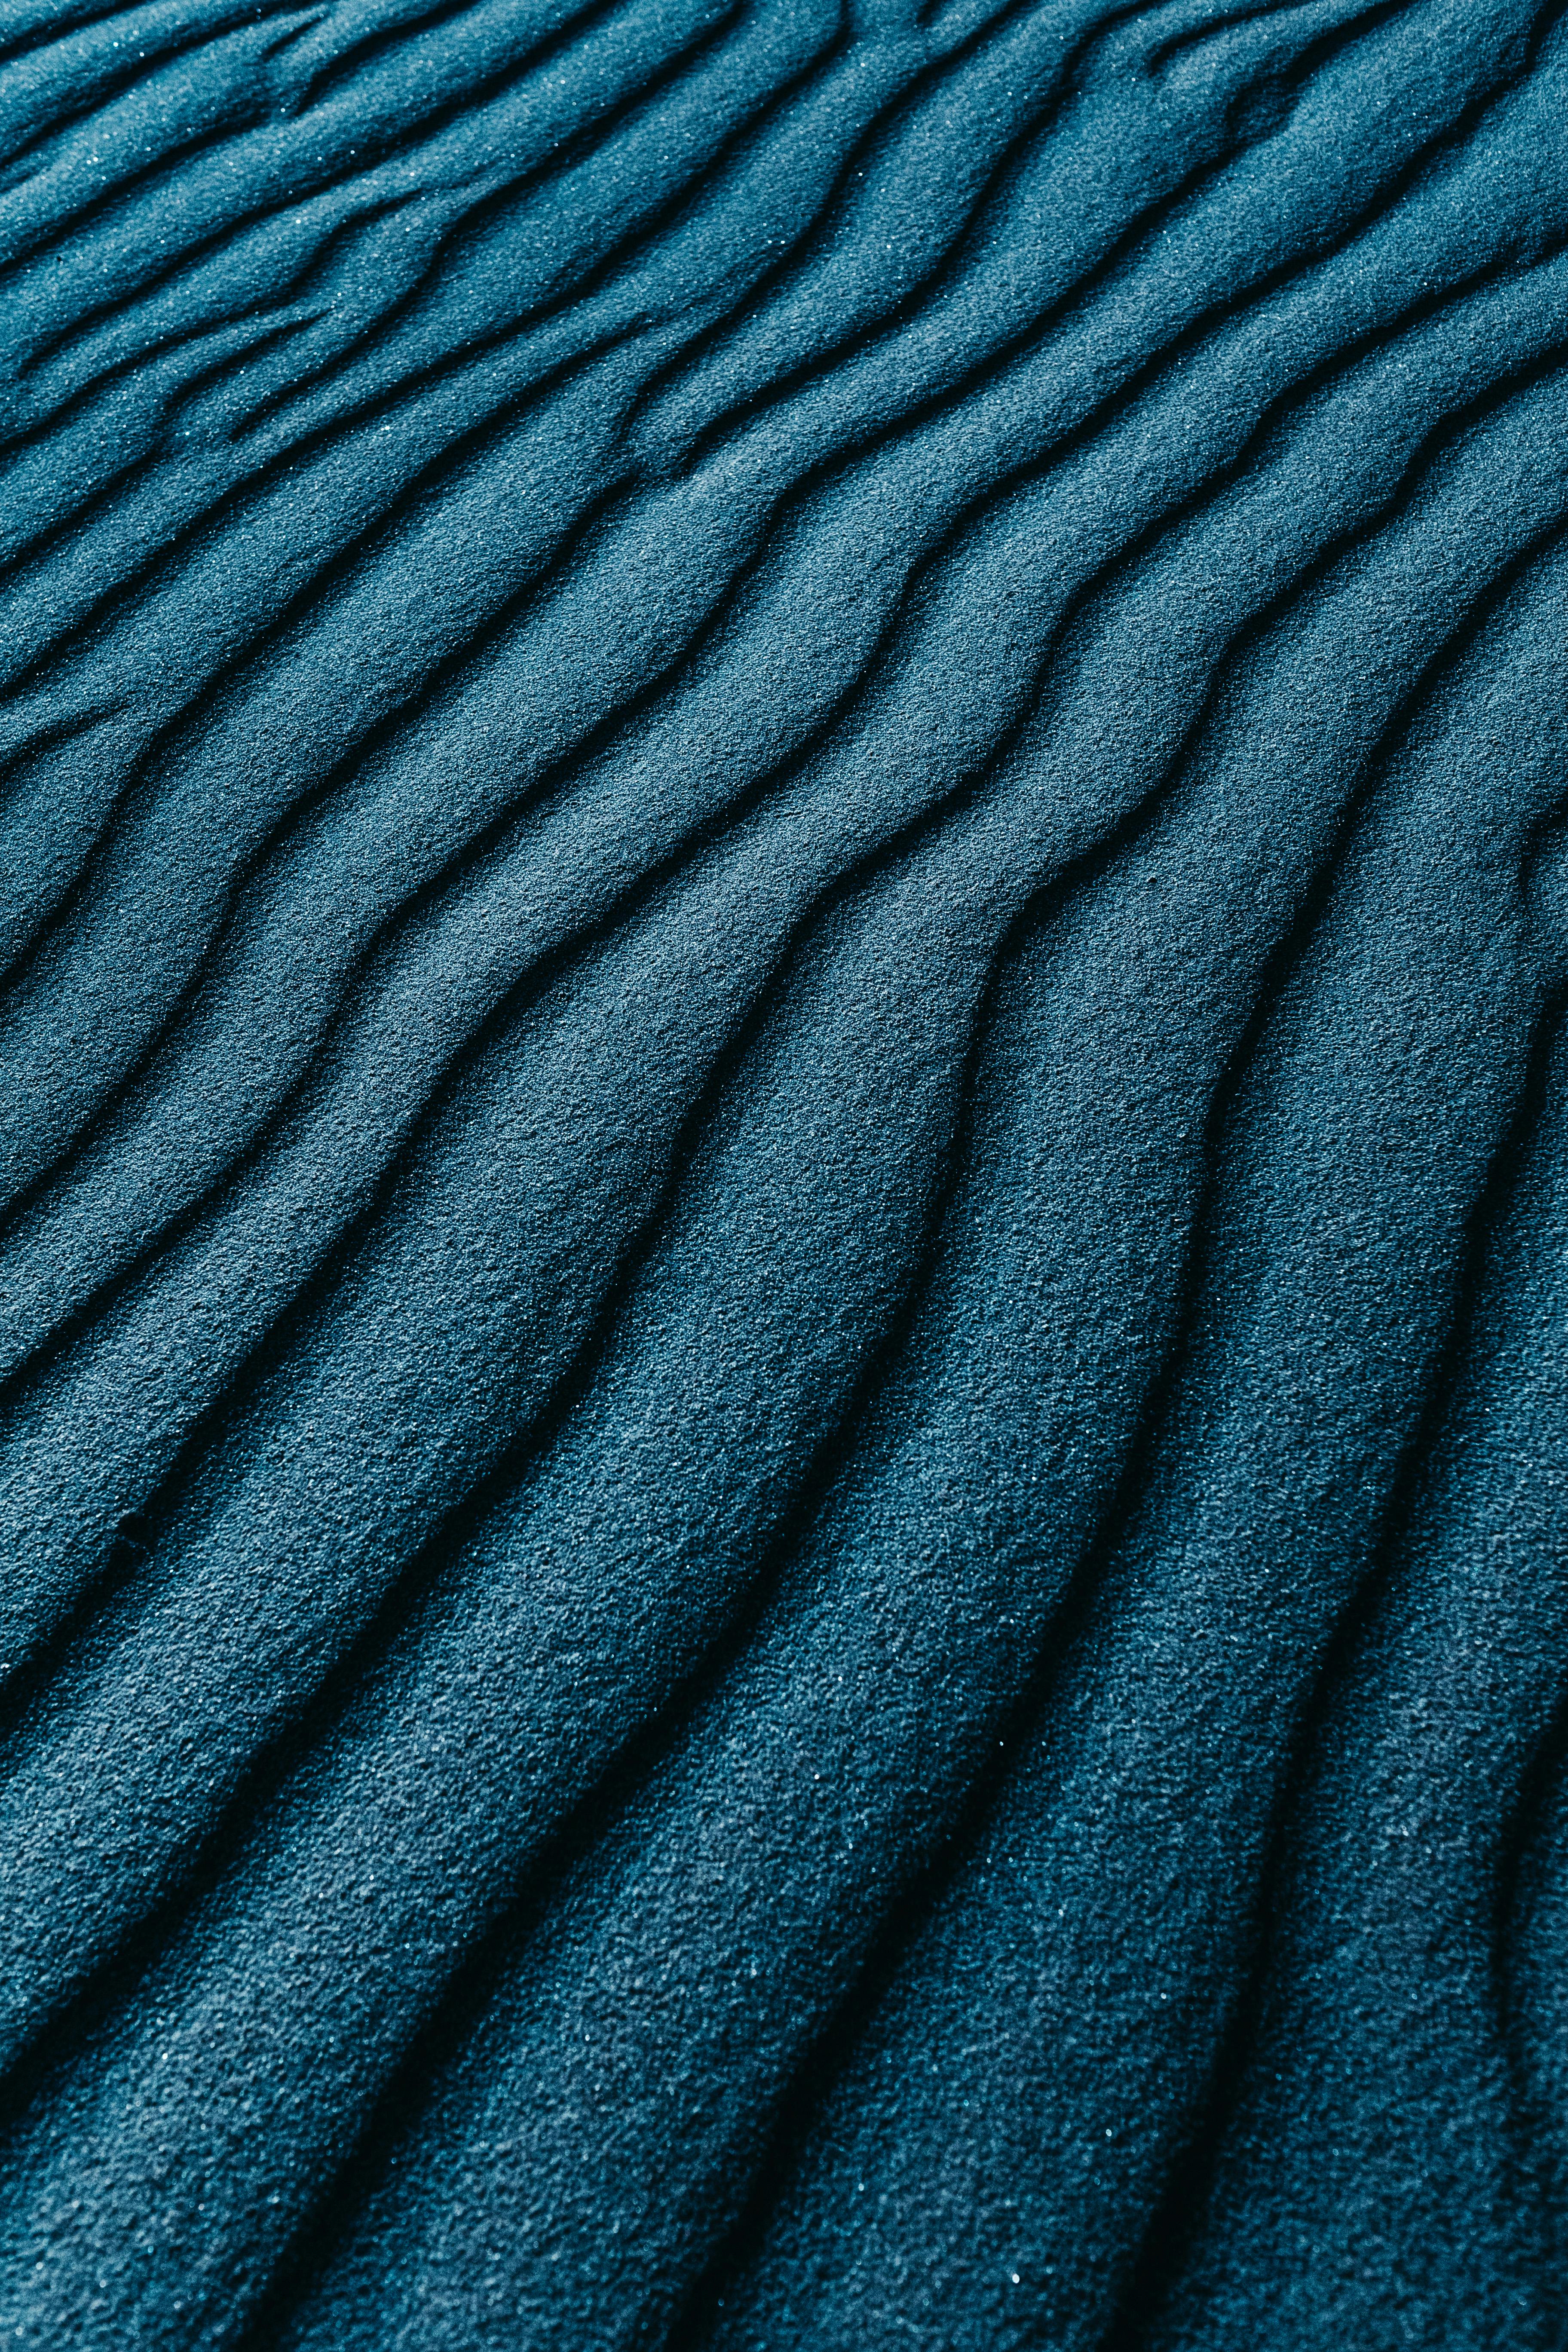 20,000+ Best Free Textures · 100% Free Download · Pexels · Free Stock Photos